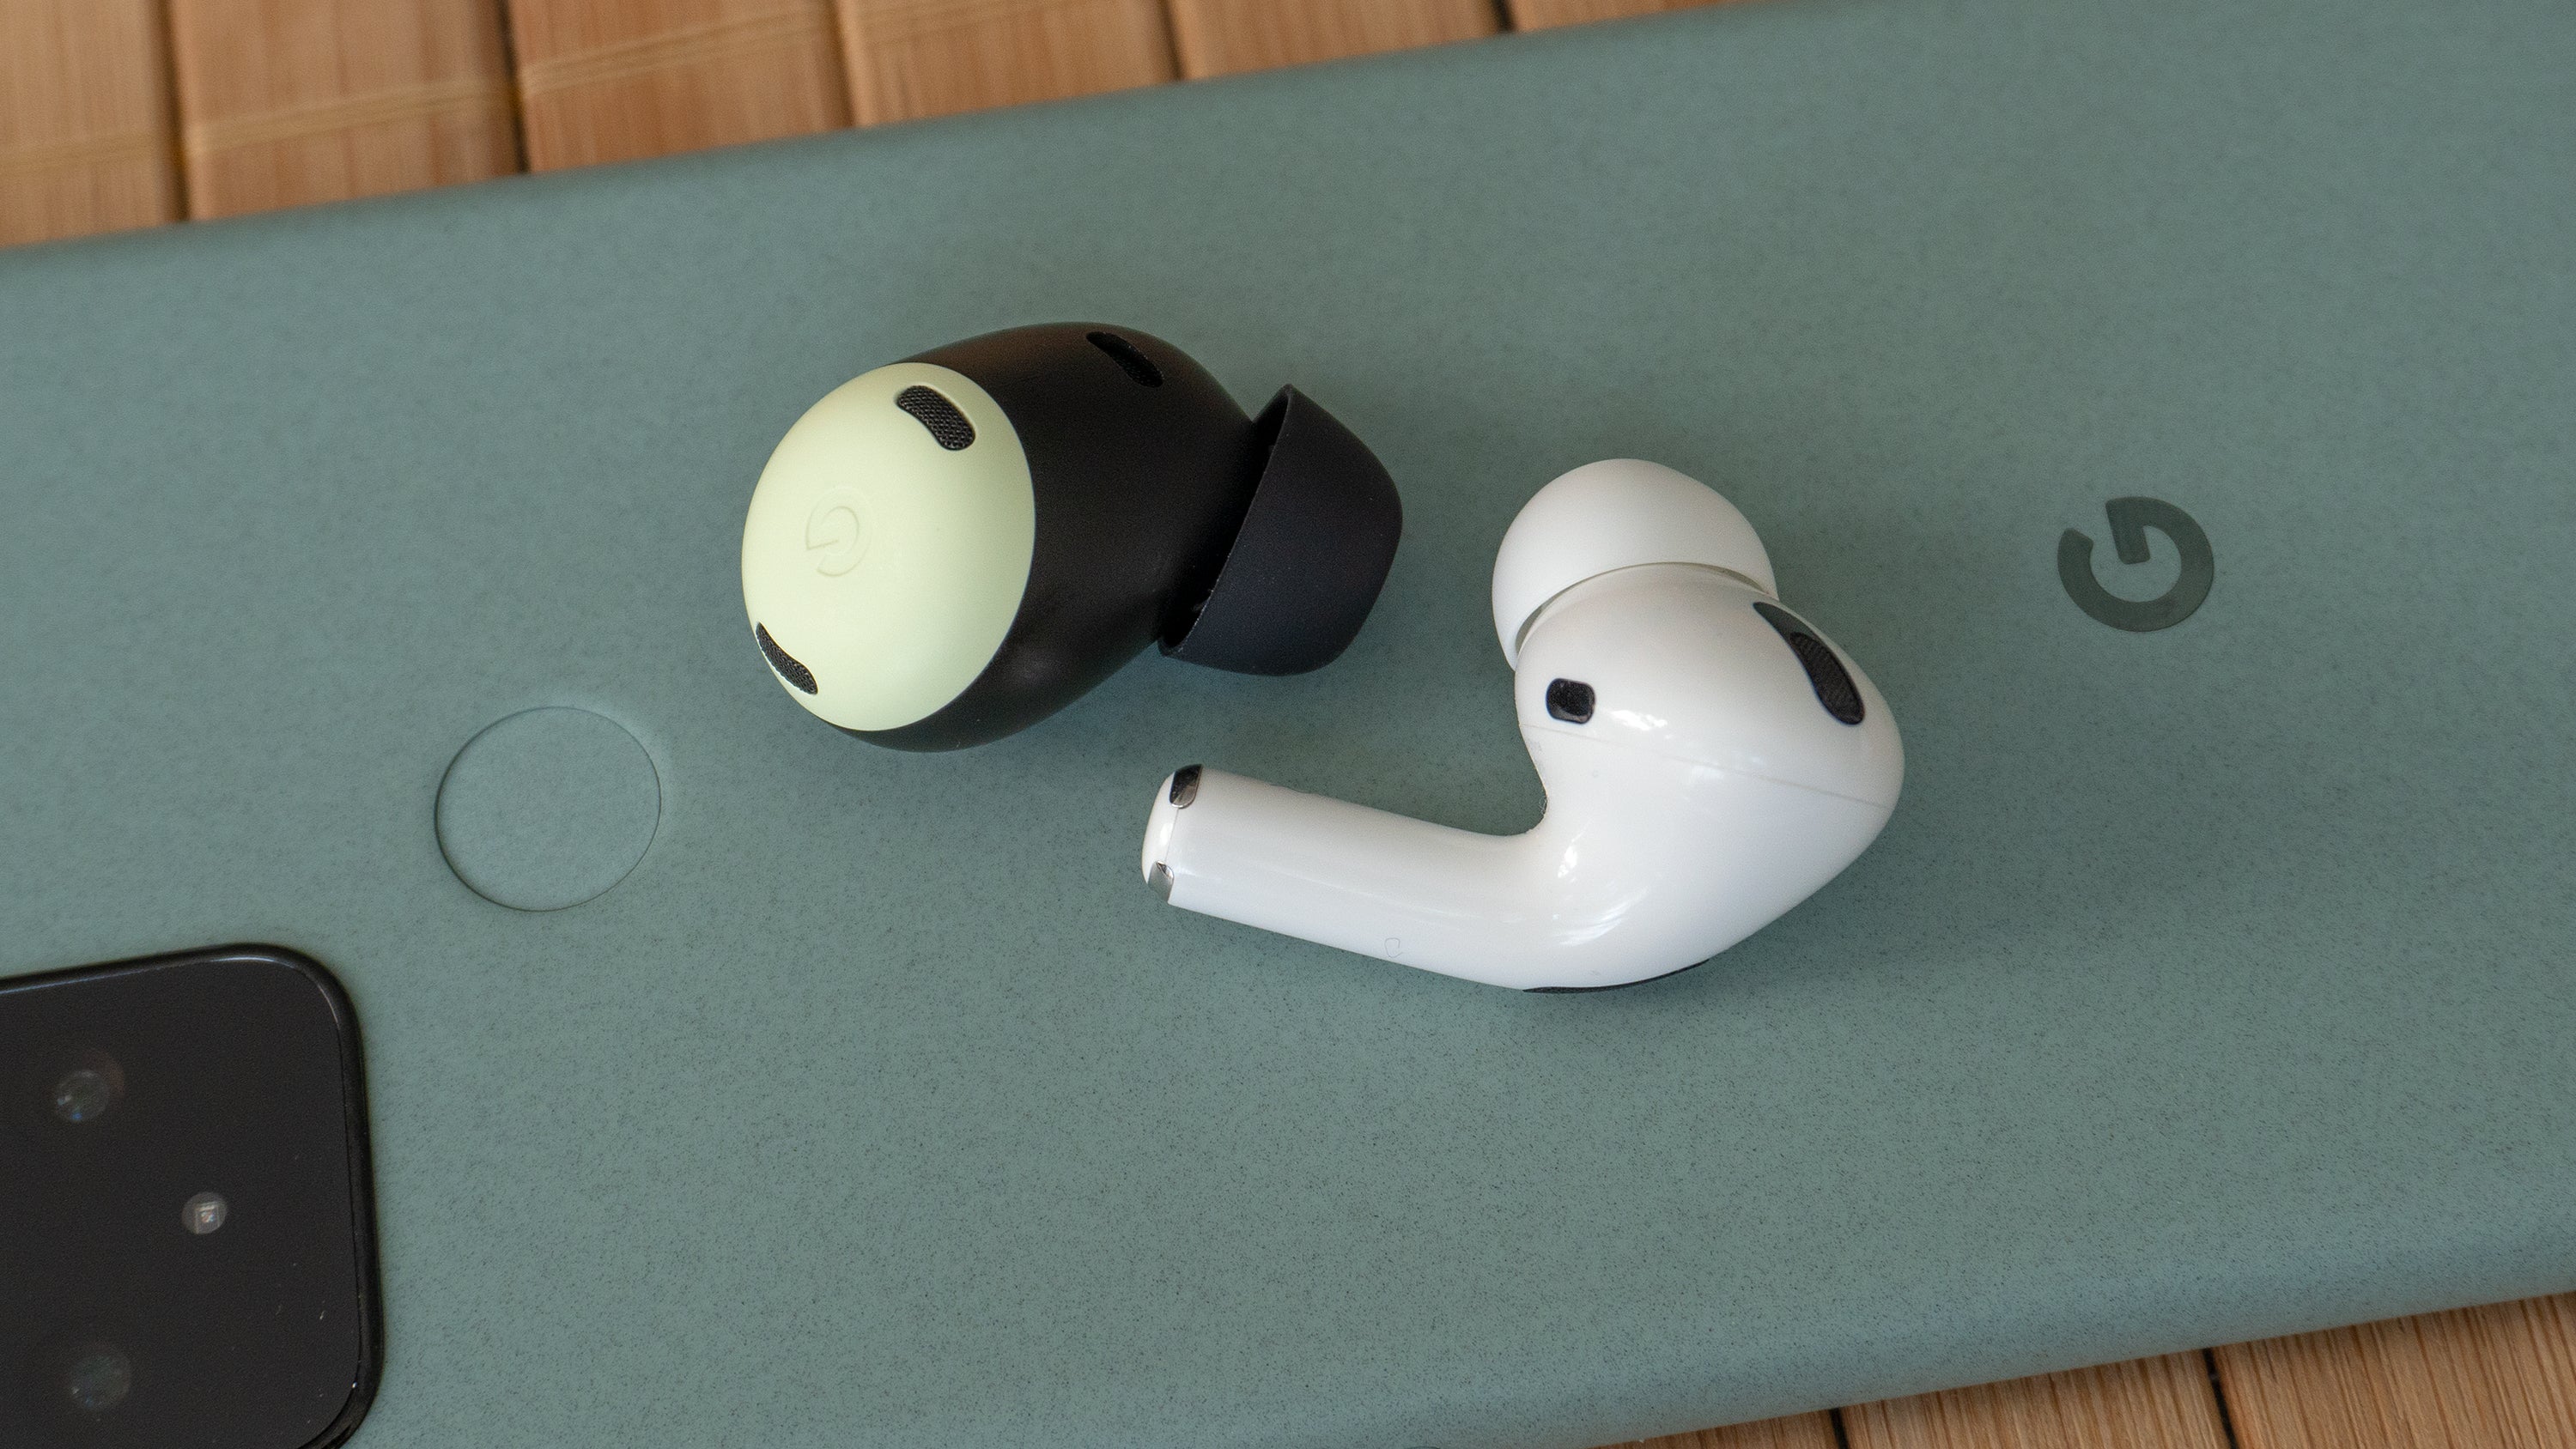 The Pixel Buds Pro (left) are very compact and easy to comfortably wear, and forego the stem design used for the AirPods Pro (right). (Photo: Andrew Liszewski | Gizmodo)